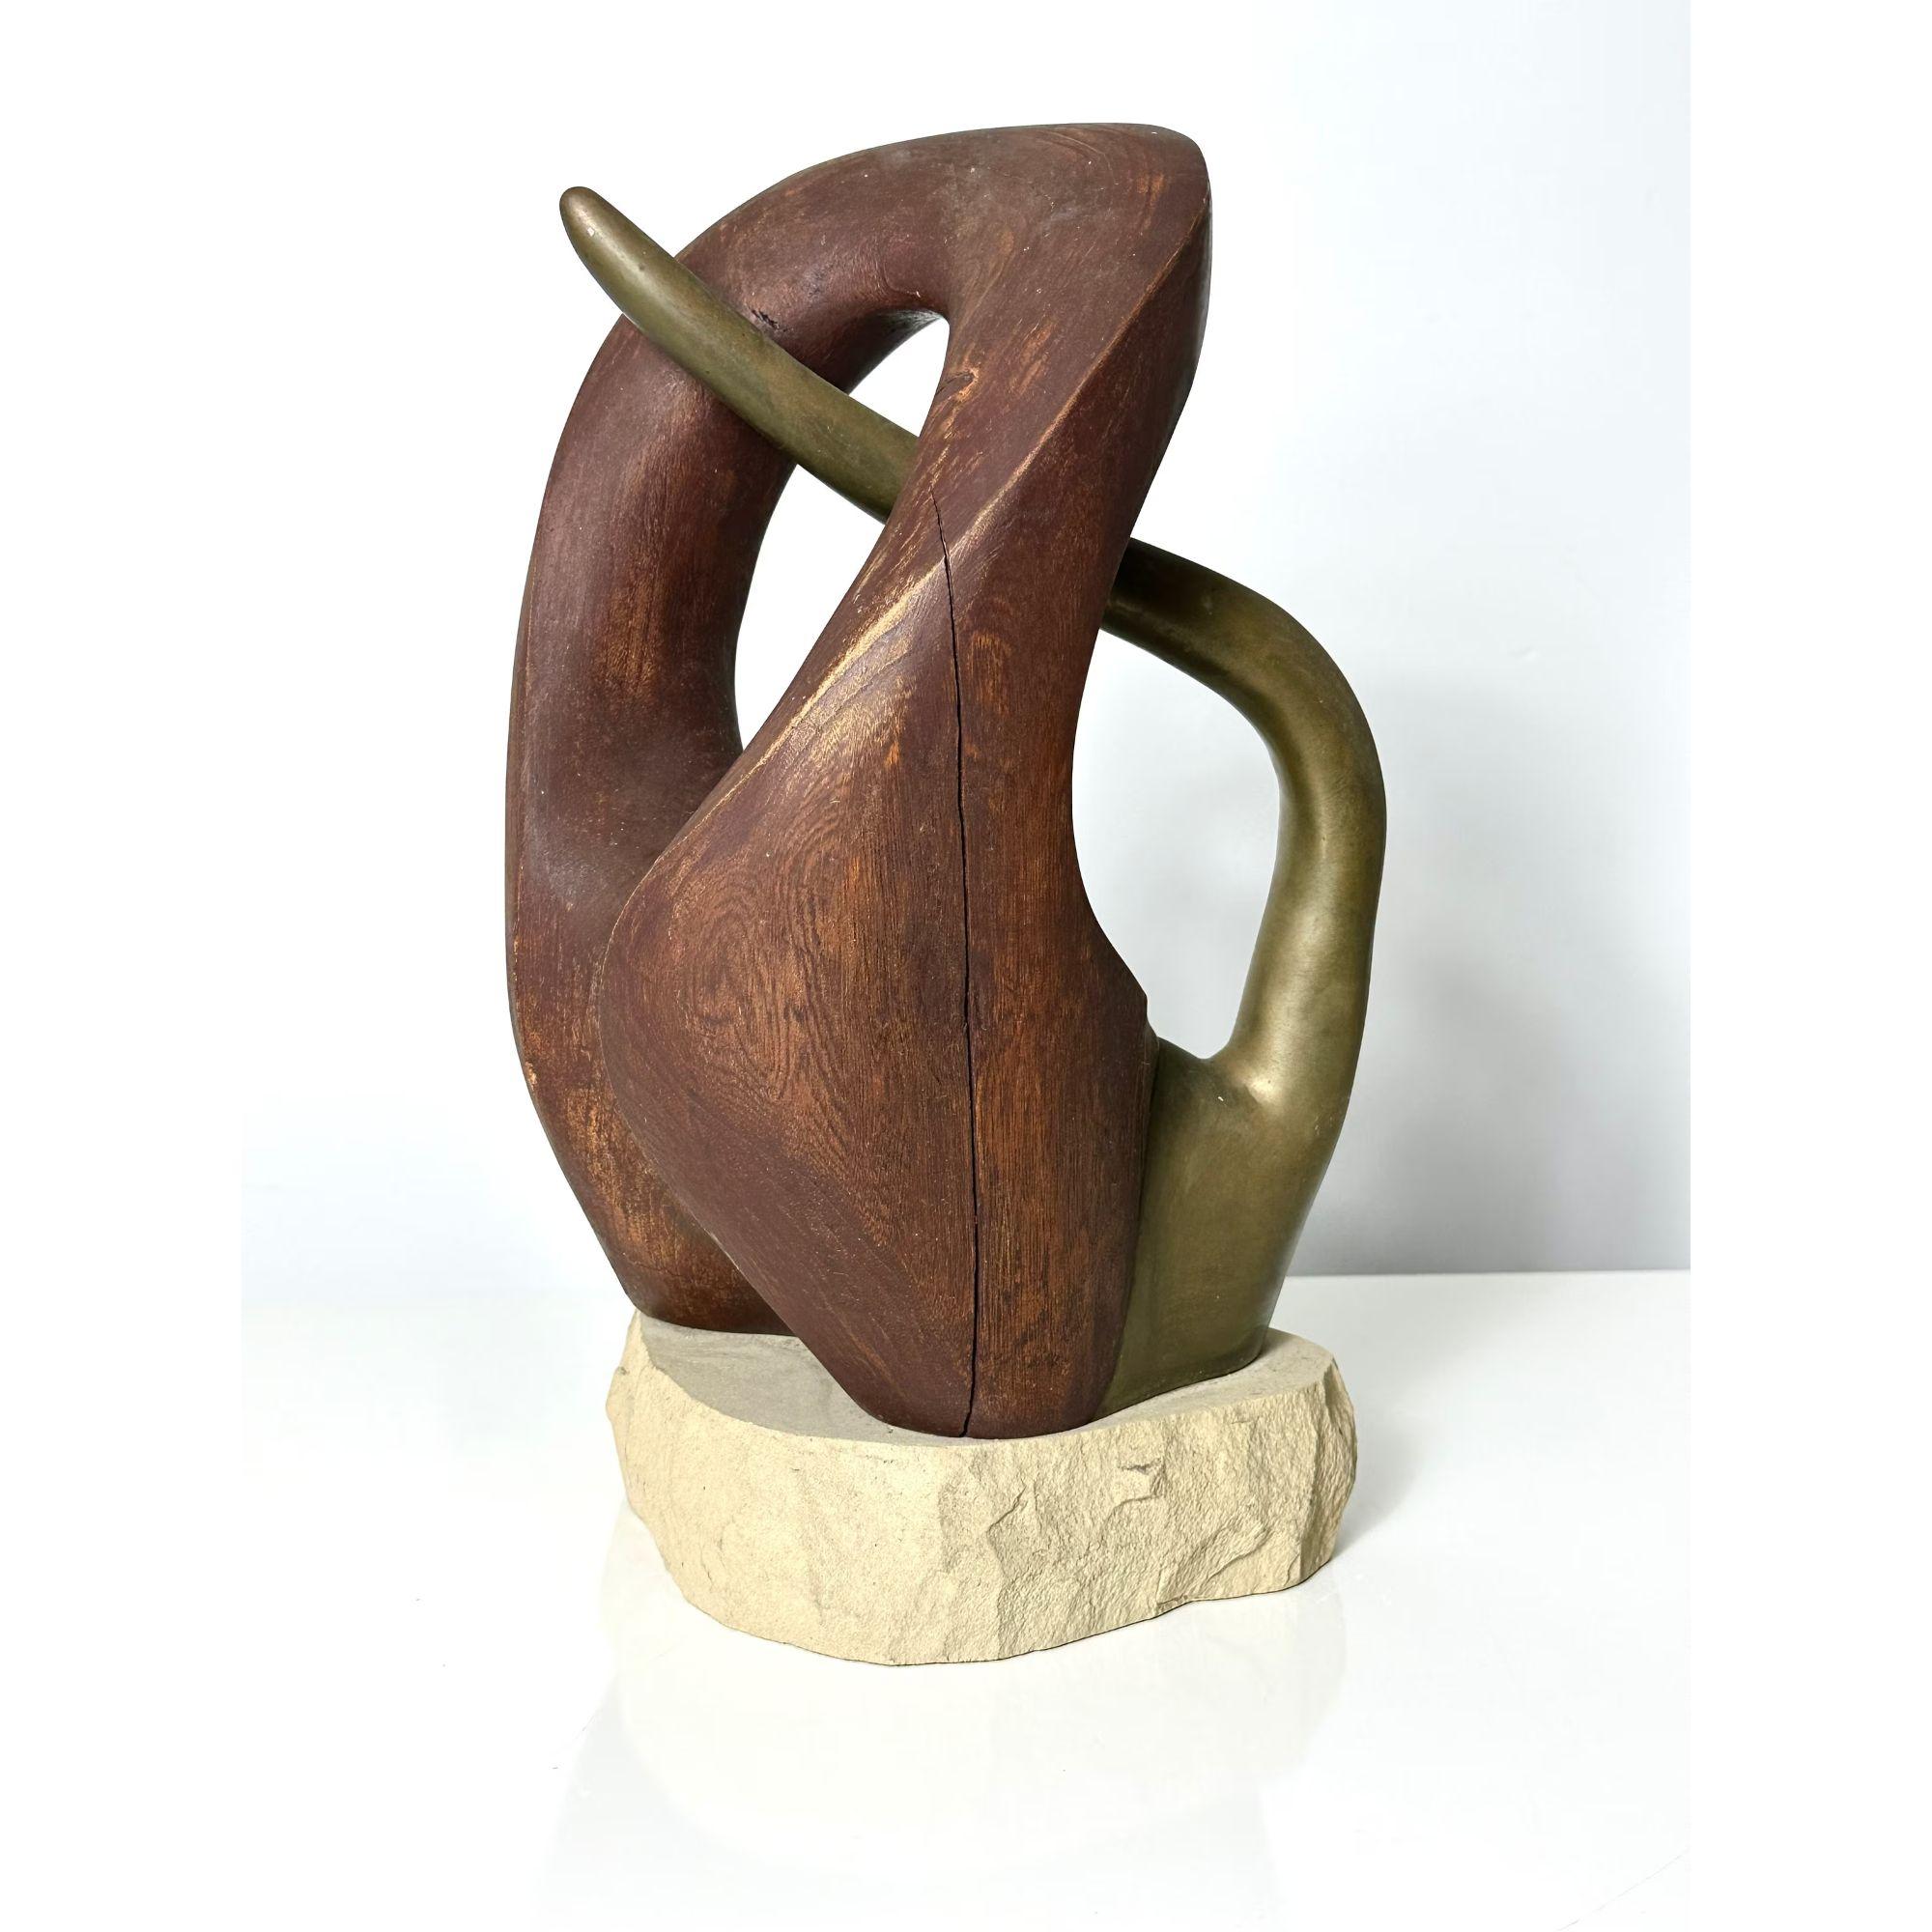 Orignal Vintage Mid Century Modern Abstract Biomorphic Wood & Bronze Sculpture by Fred Scott 

Very unique sculpture by Ohio artist Fred Scott circa 1960s
Carved wood with intersecting bronze on a chiseled stone base
Acquired from the estate of the